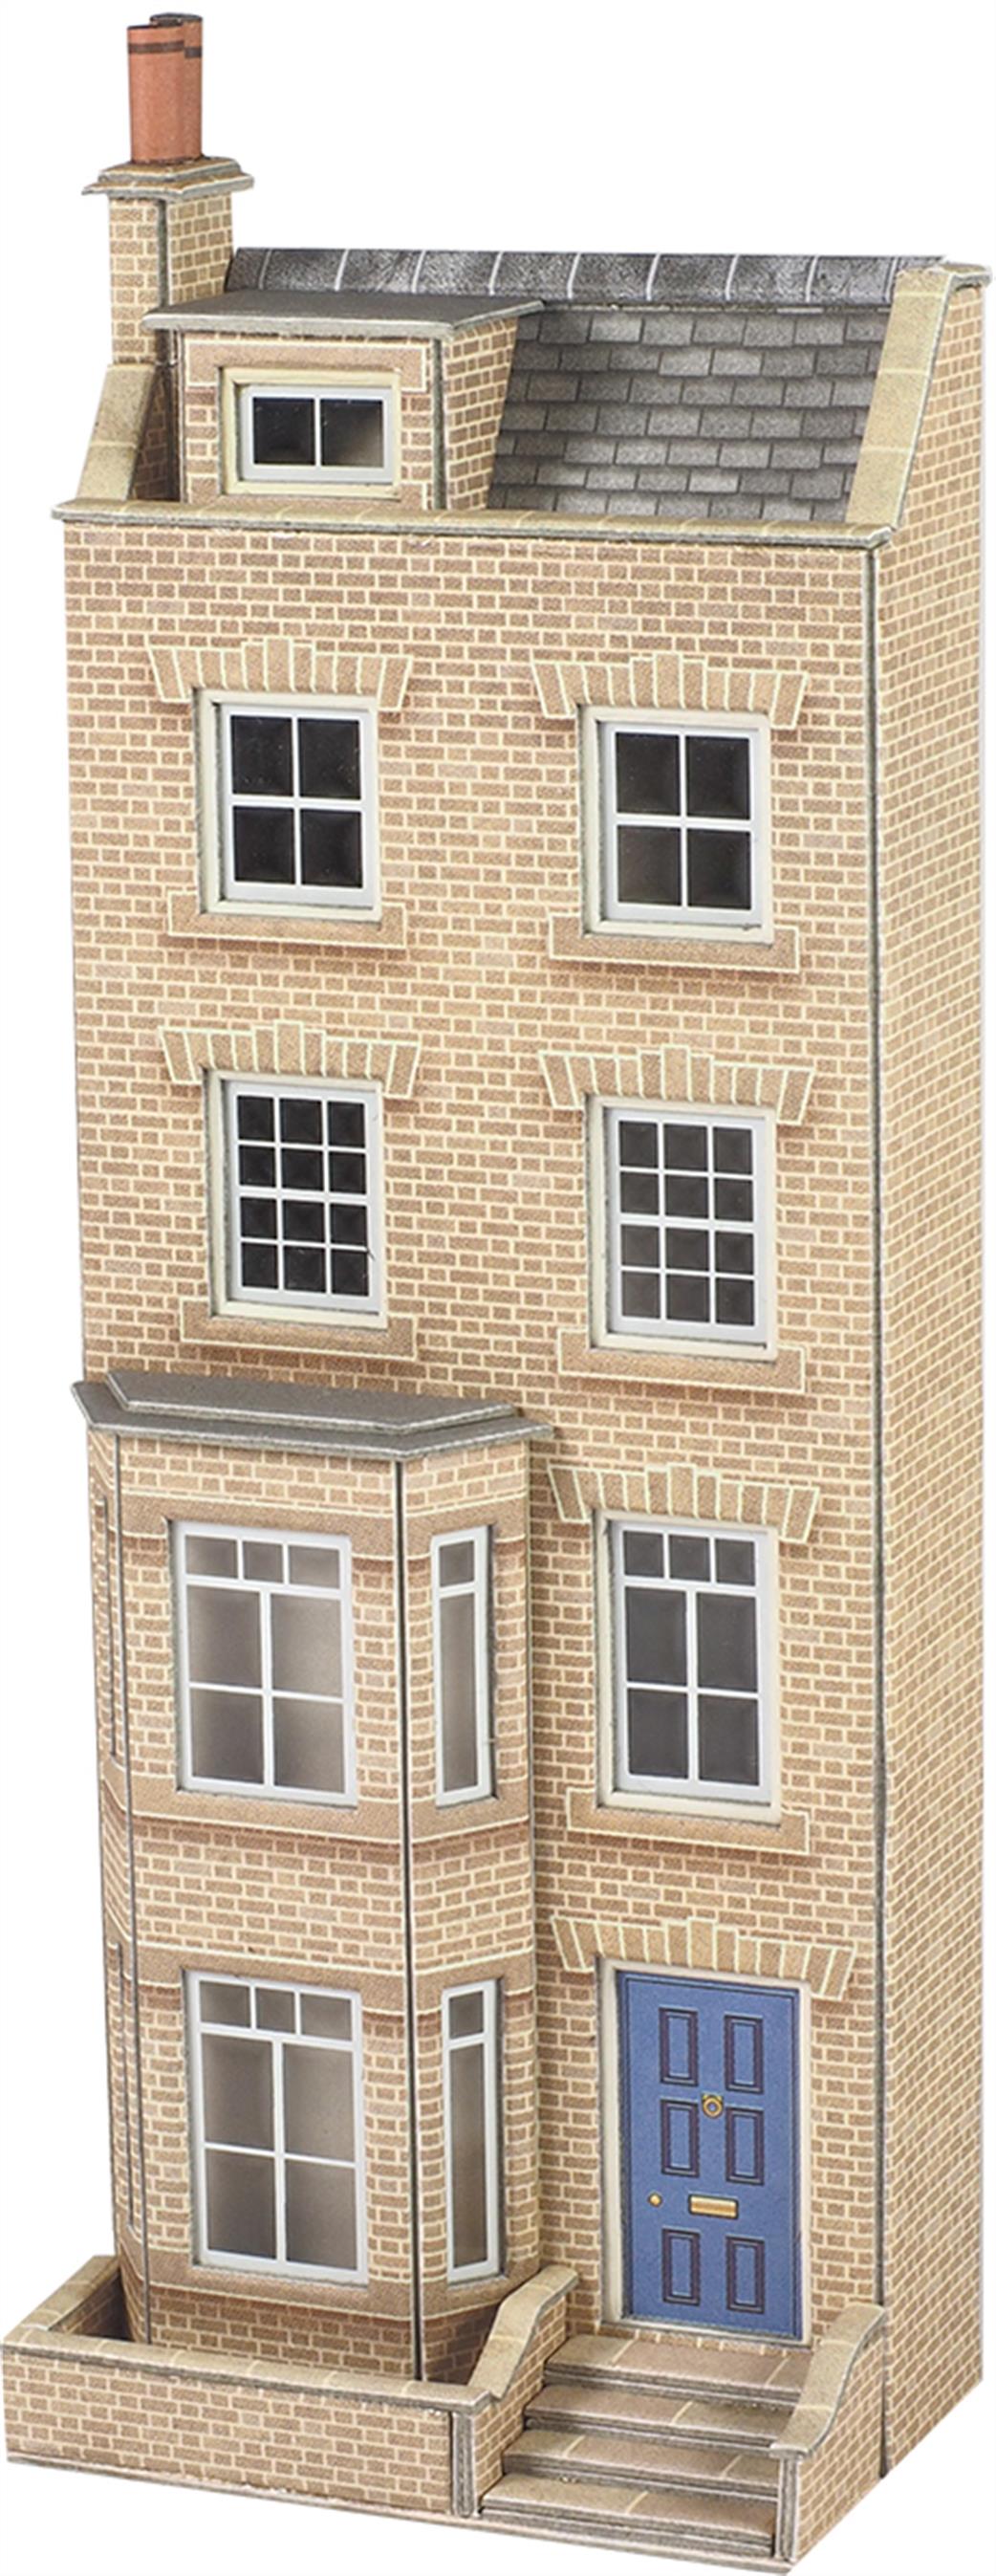 Metcalfe OO PO373 Georgian Town House Low Relief Card Construction Kit